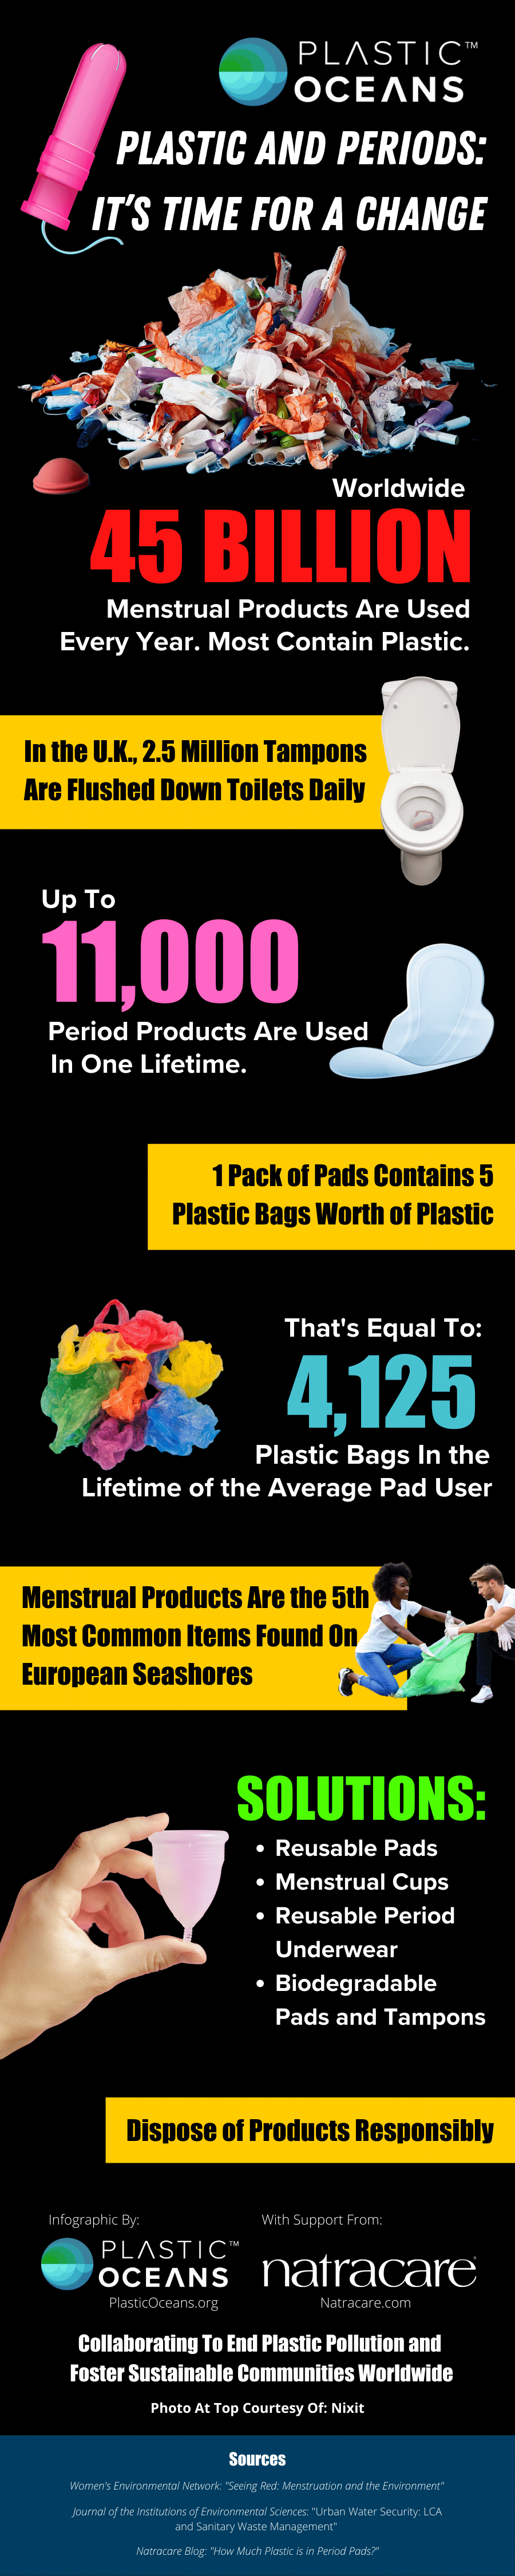 Infographic on Period Products and Plastic